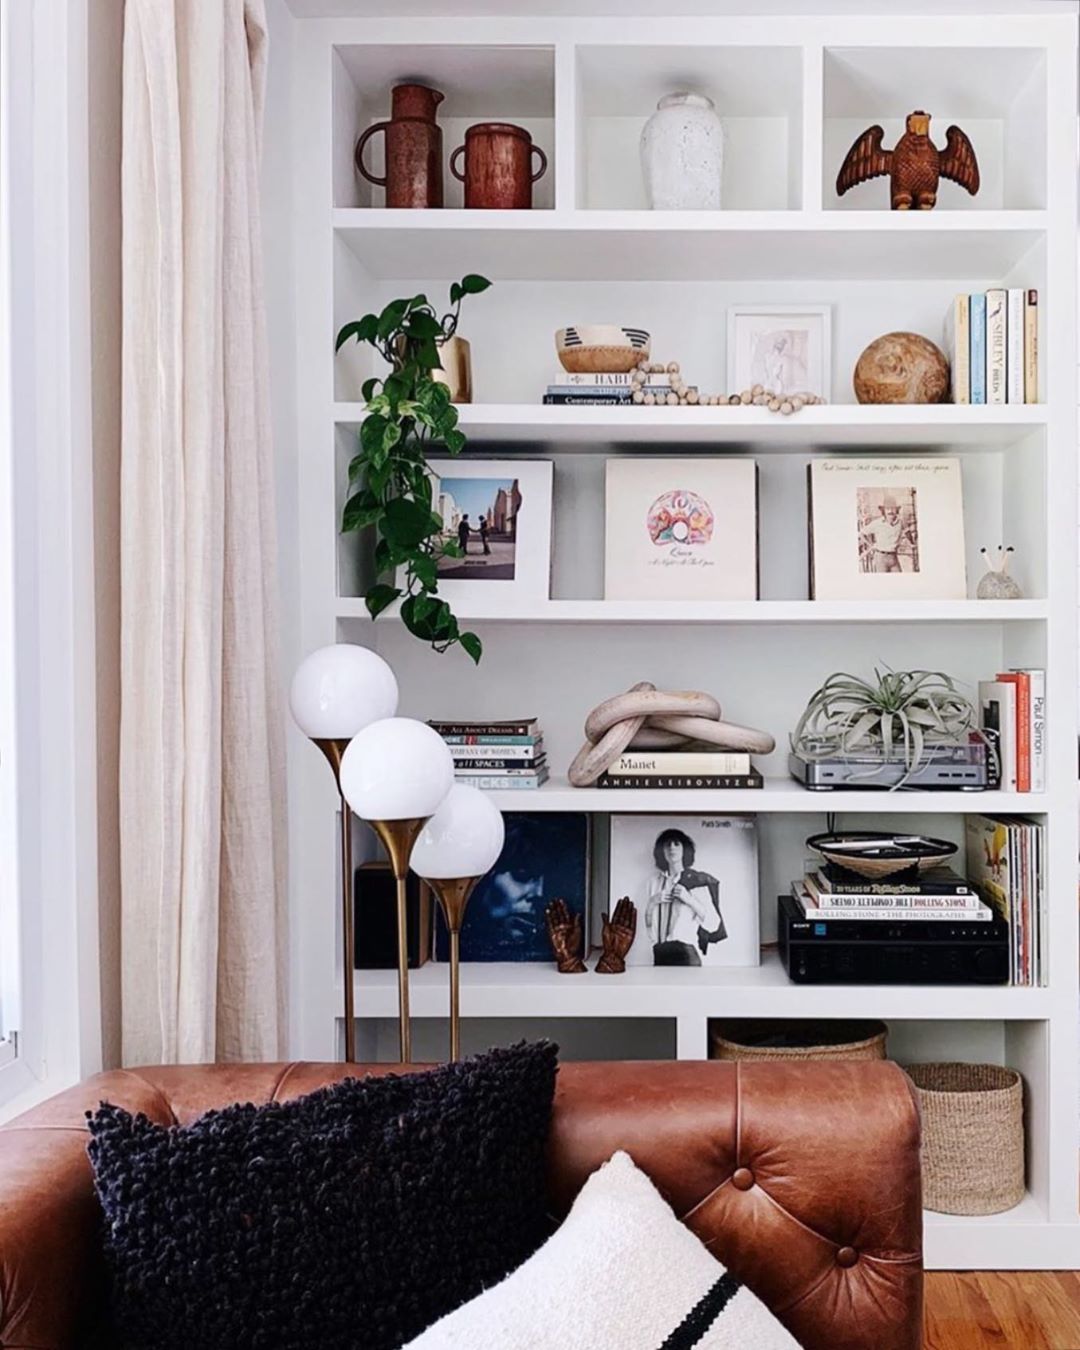 built-in shelving in a small home photo by Instagram user @undecorated_home